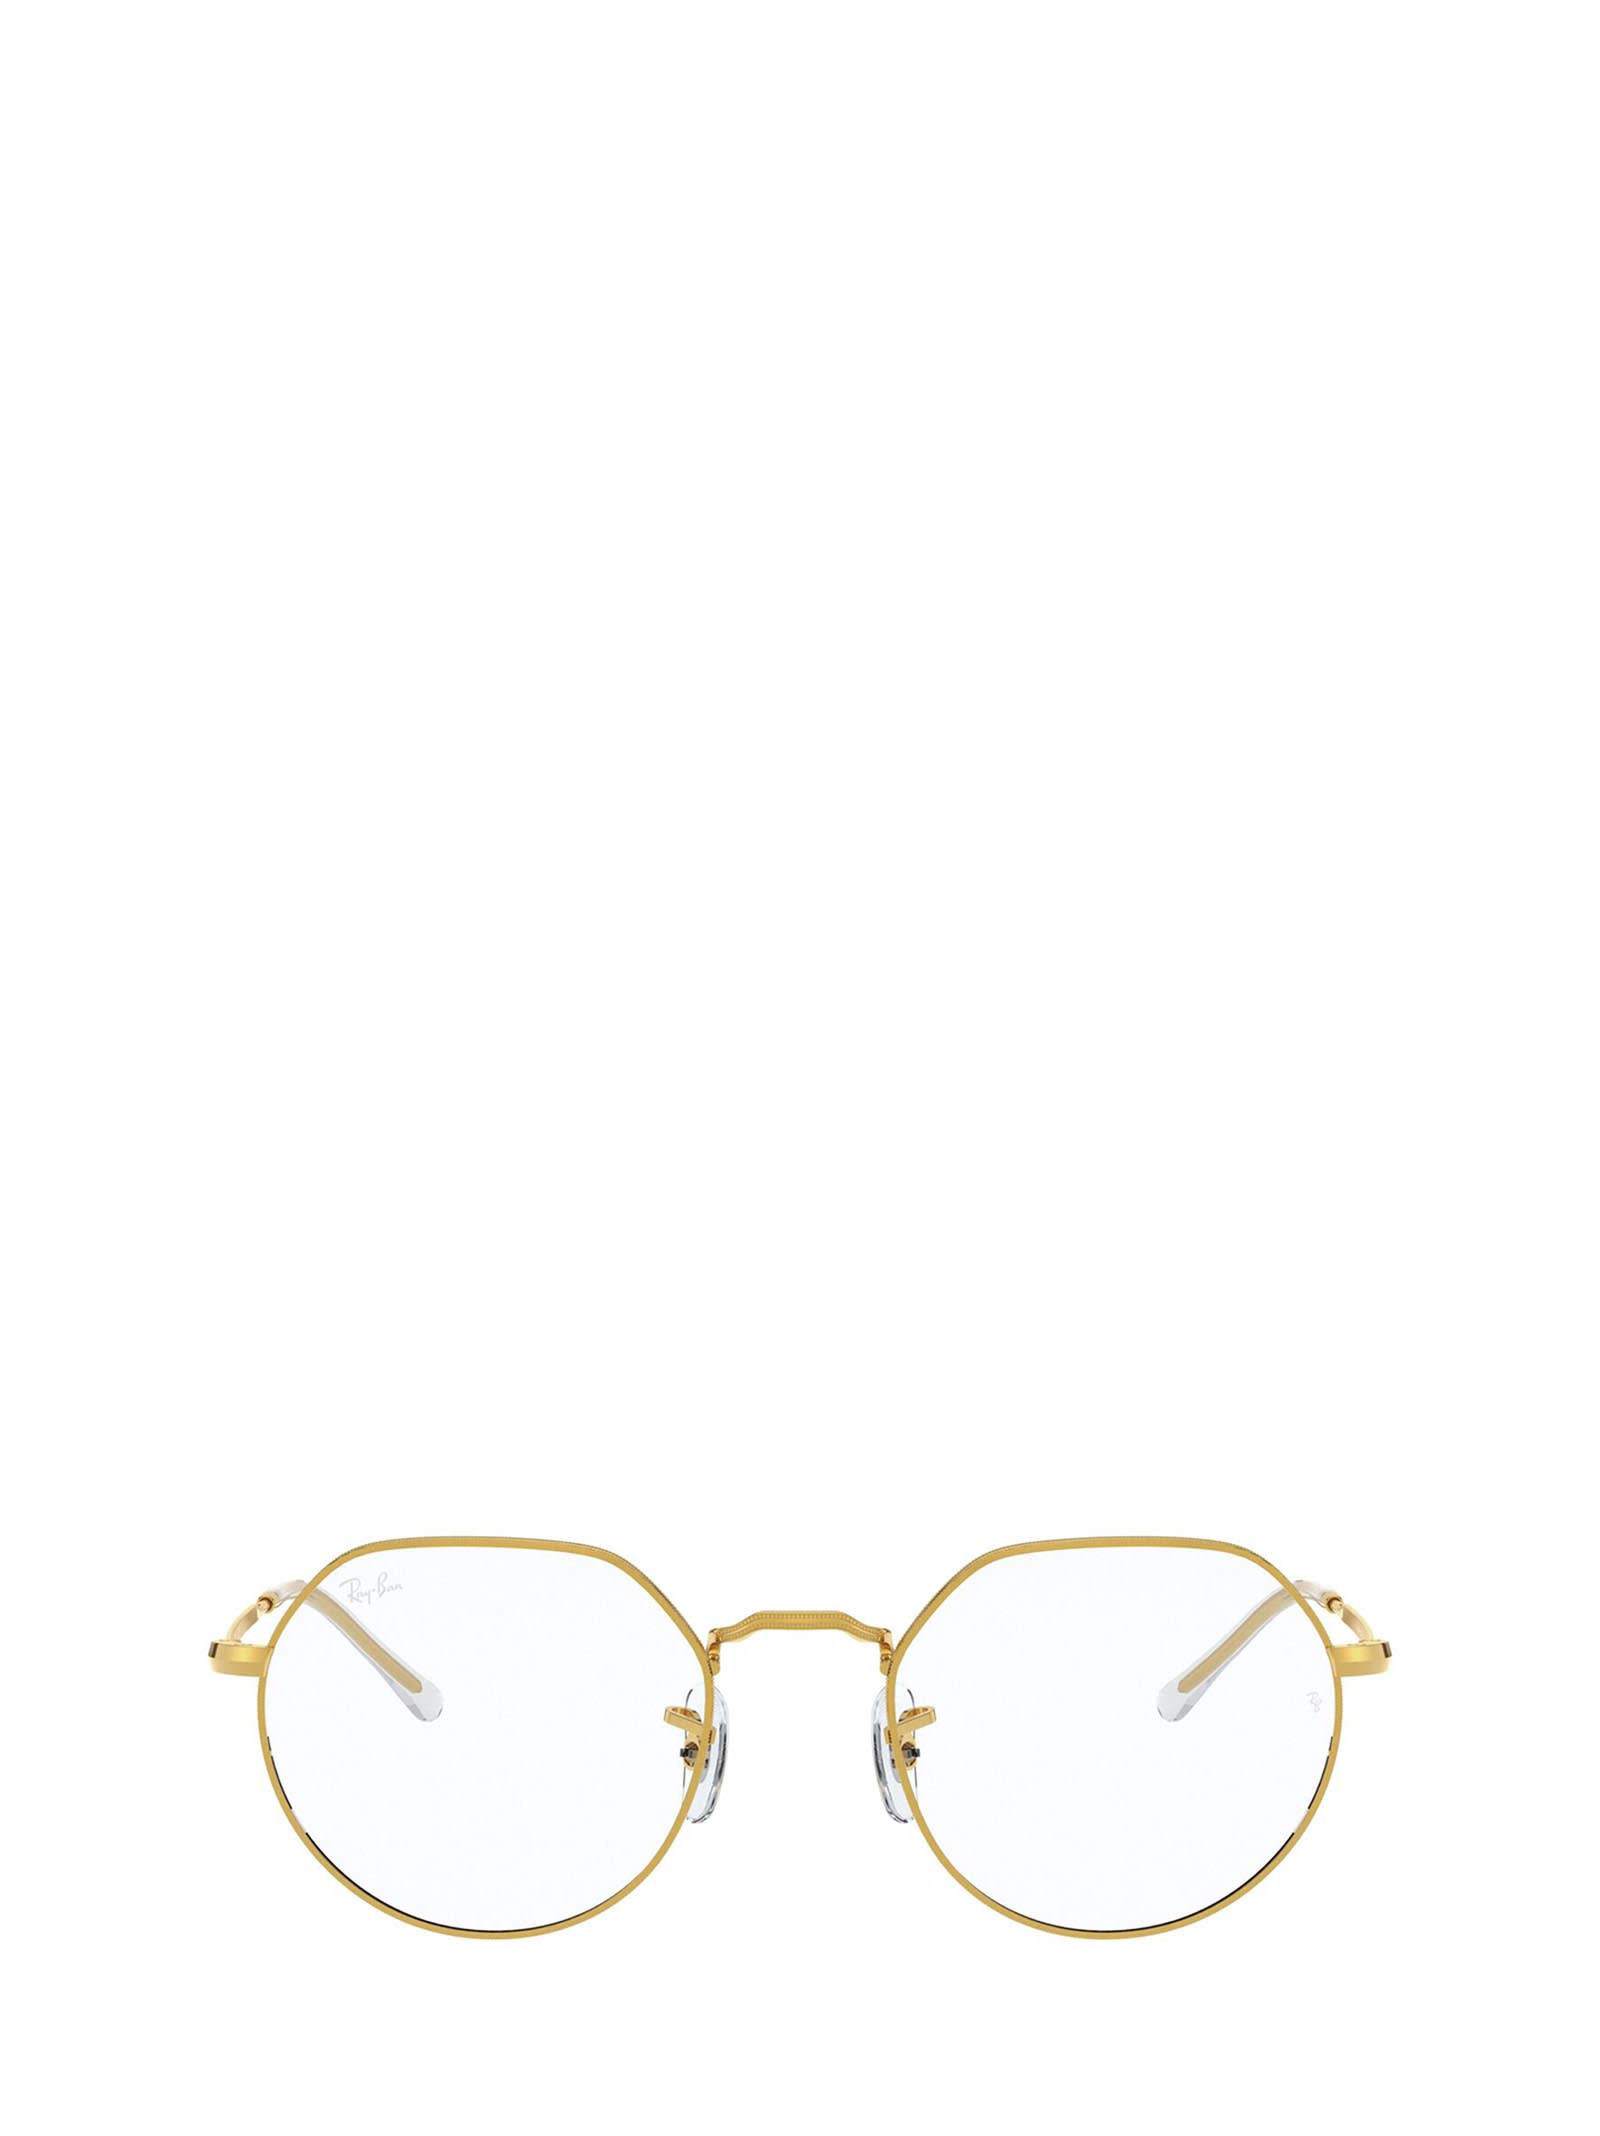 RAY BAN RX6465 LEGEND GOLD GLASSES